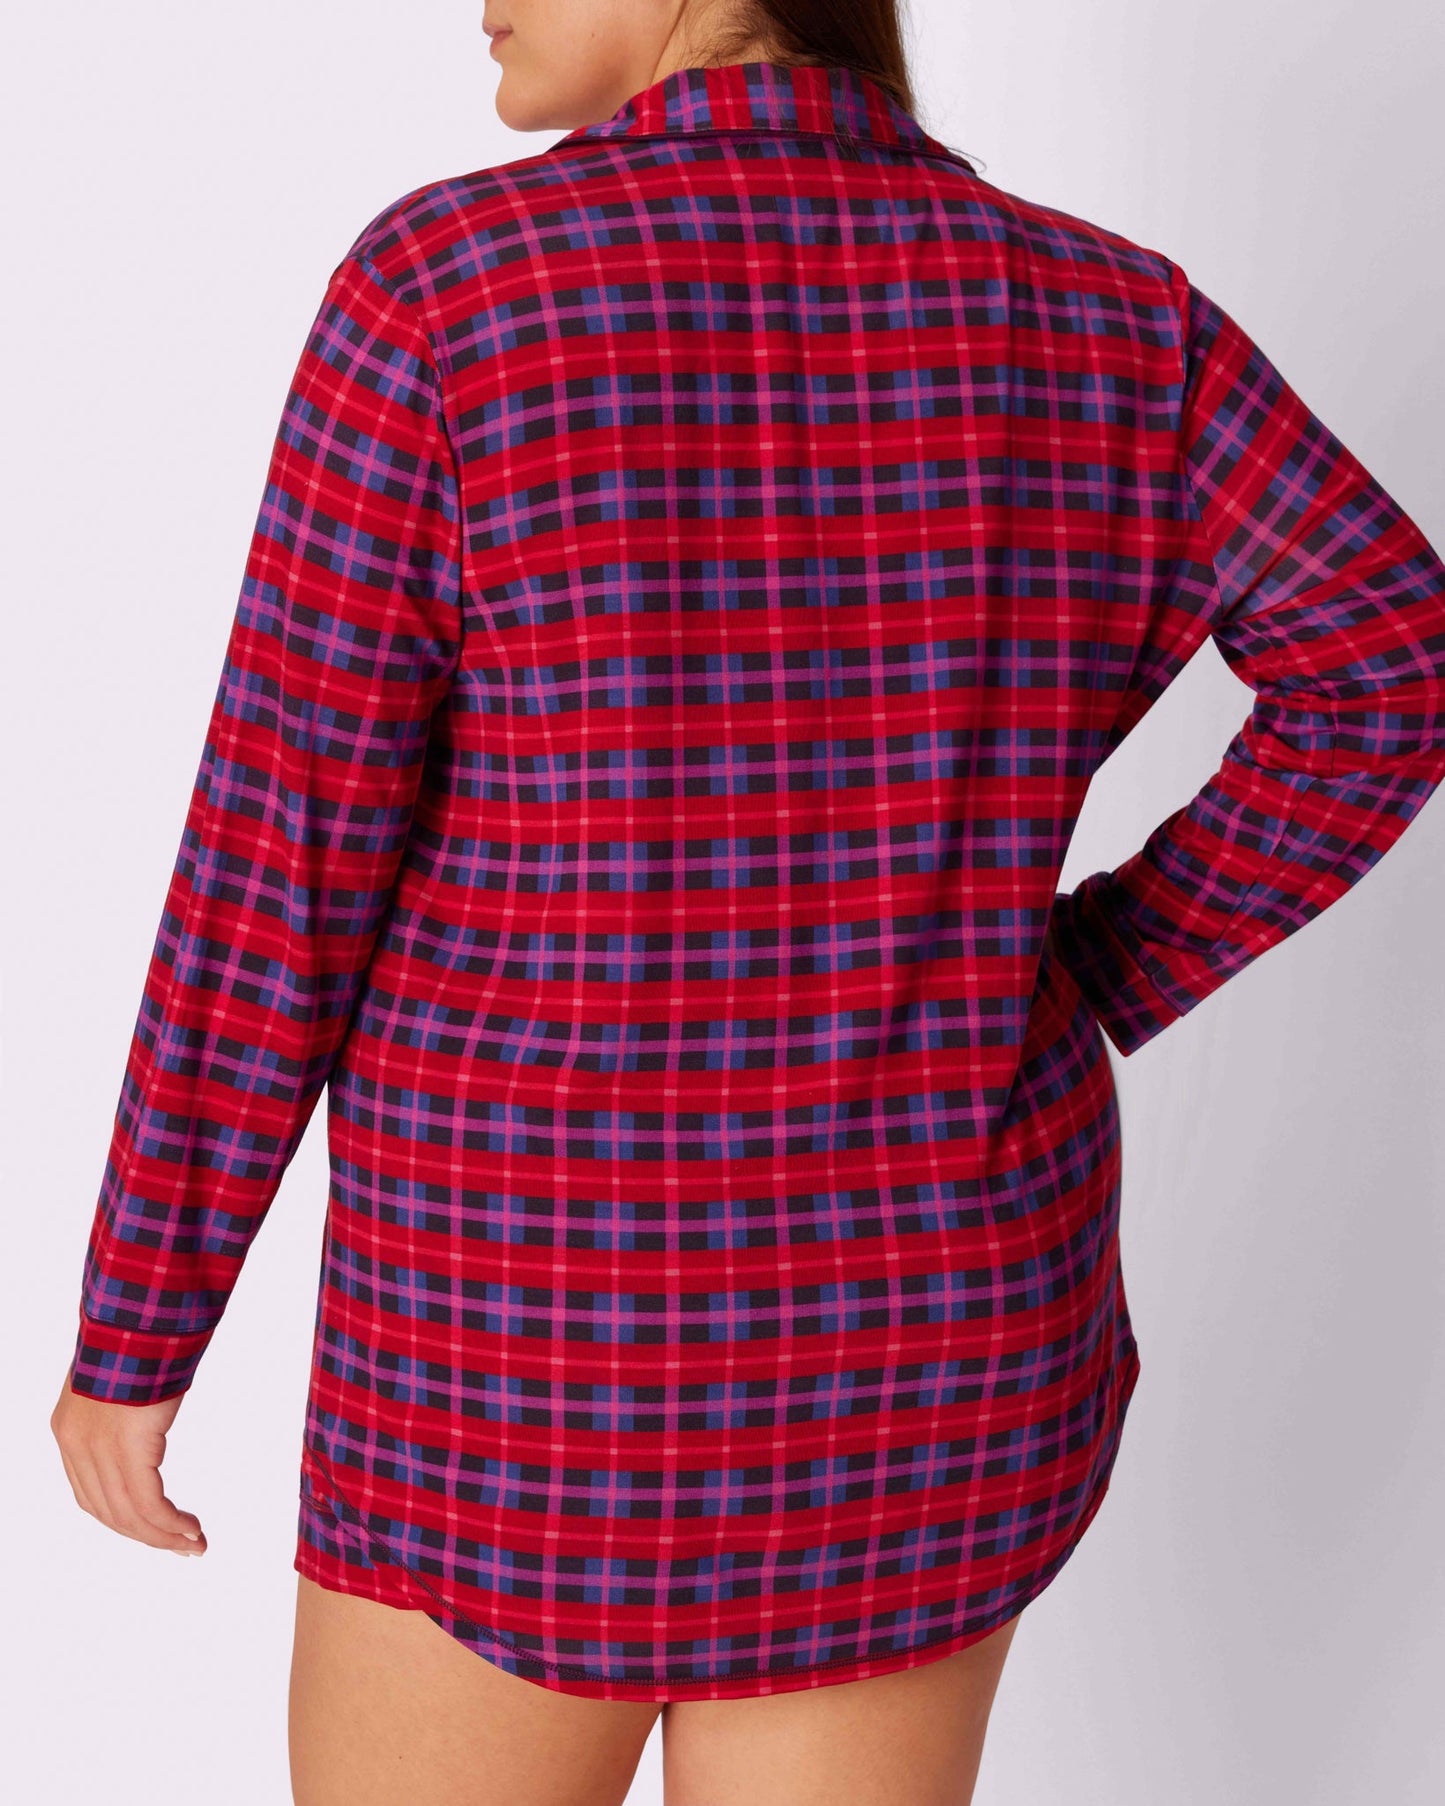 Cloud Longsleeve Button Up | SuperSoft | Archive (Crushed Berry Plaid)